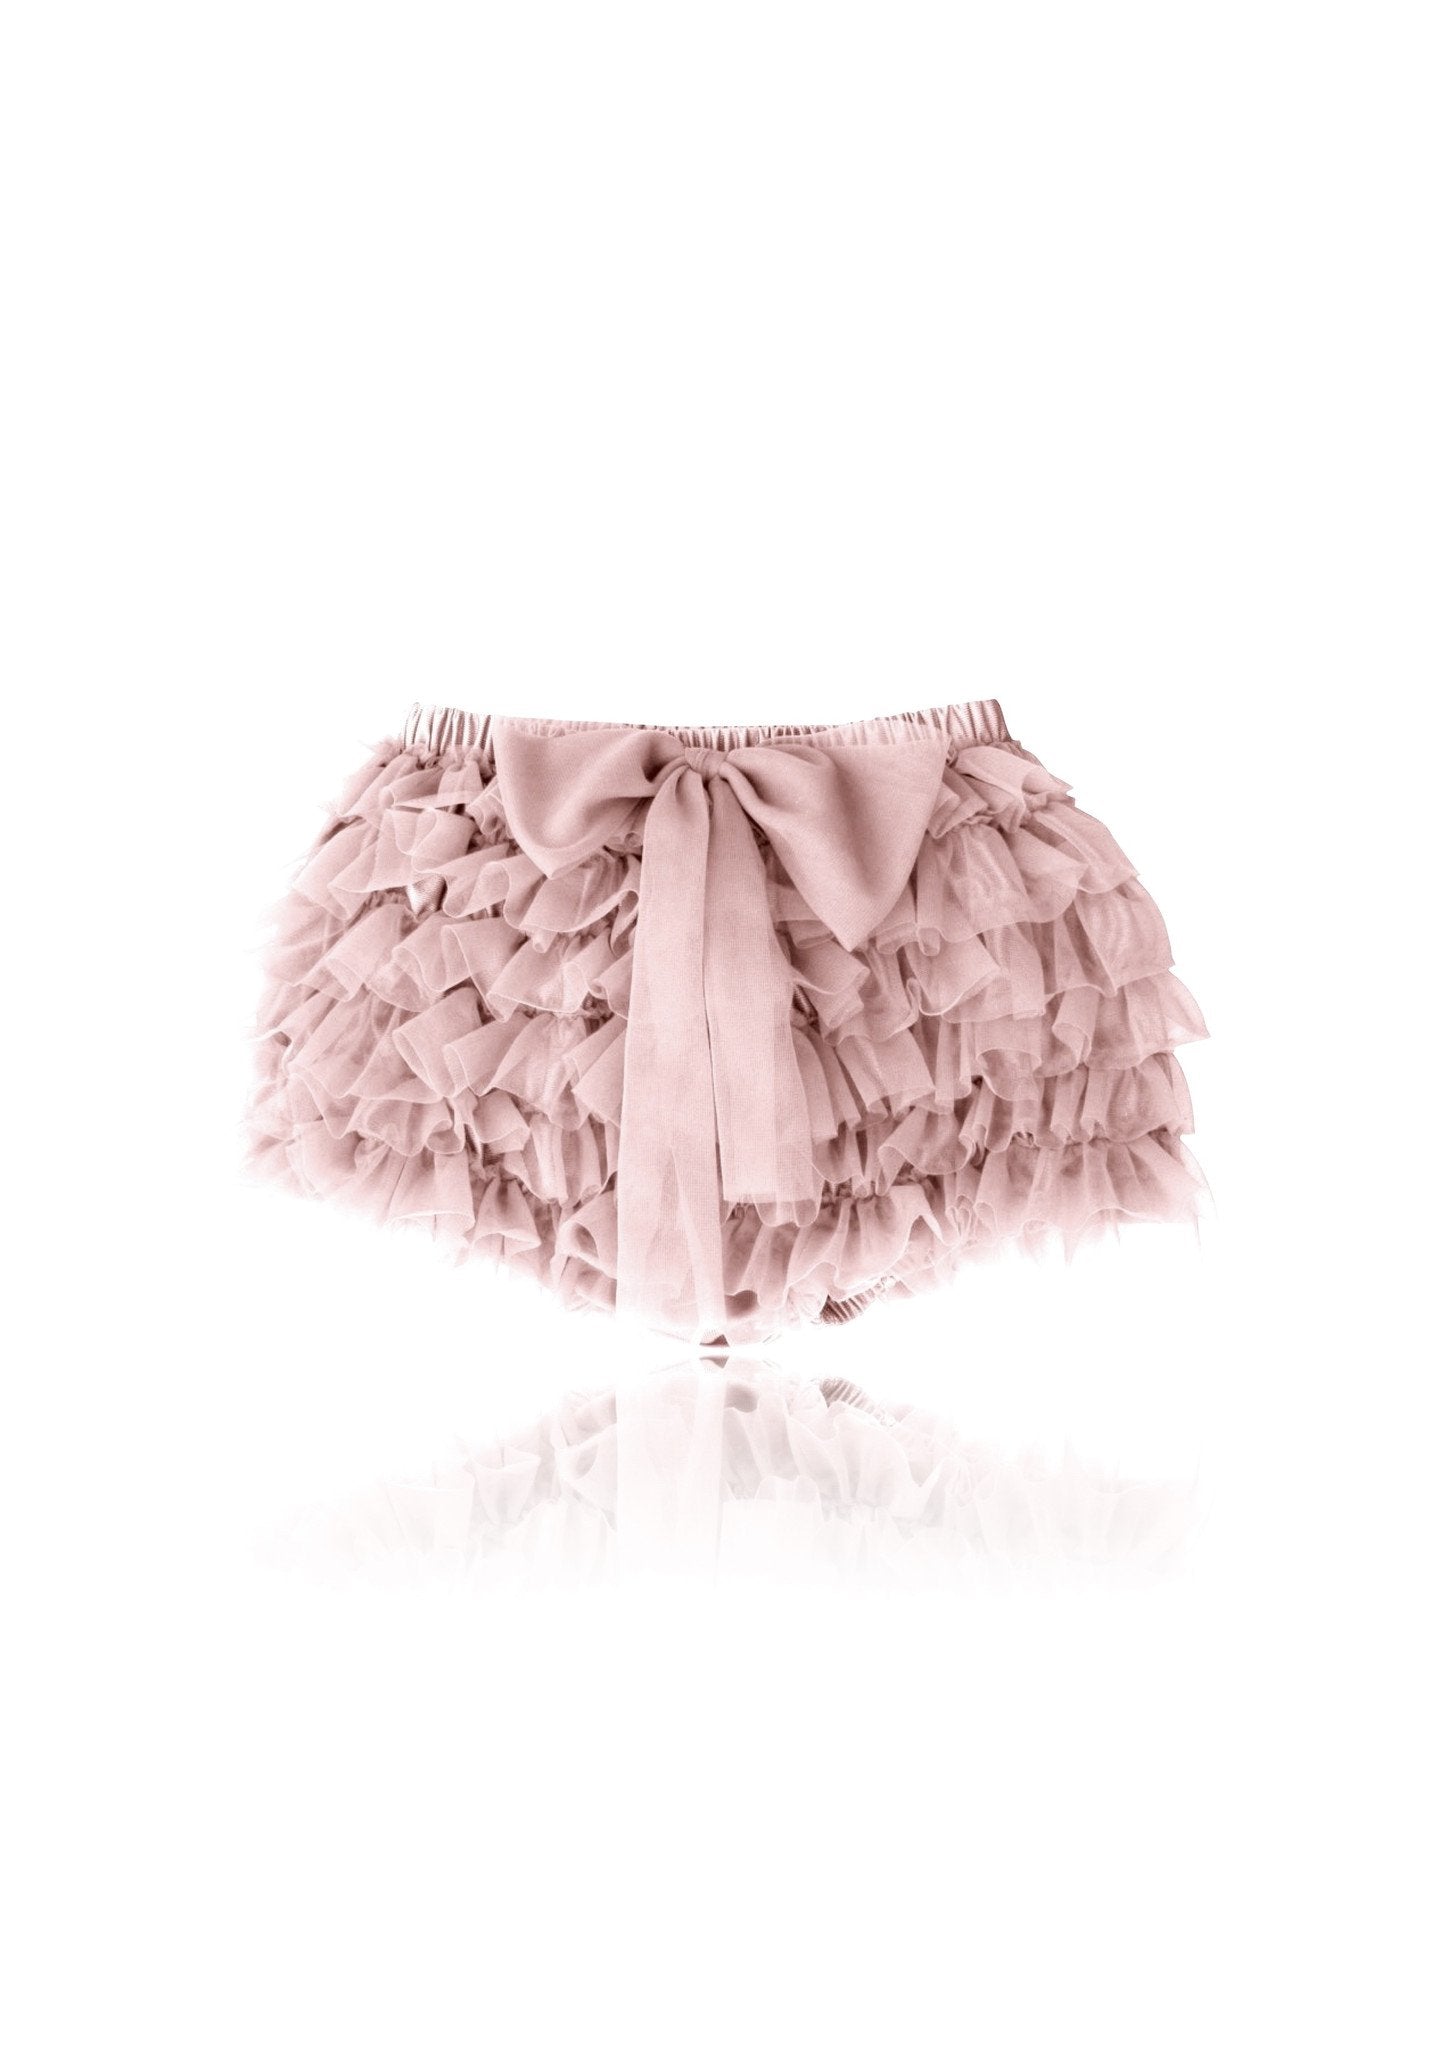 DOLLY by Le Petit Tom ® FRILLY PANTS ballet pink - DOLLY by Le Petit Tom ®